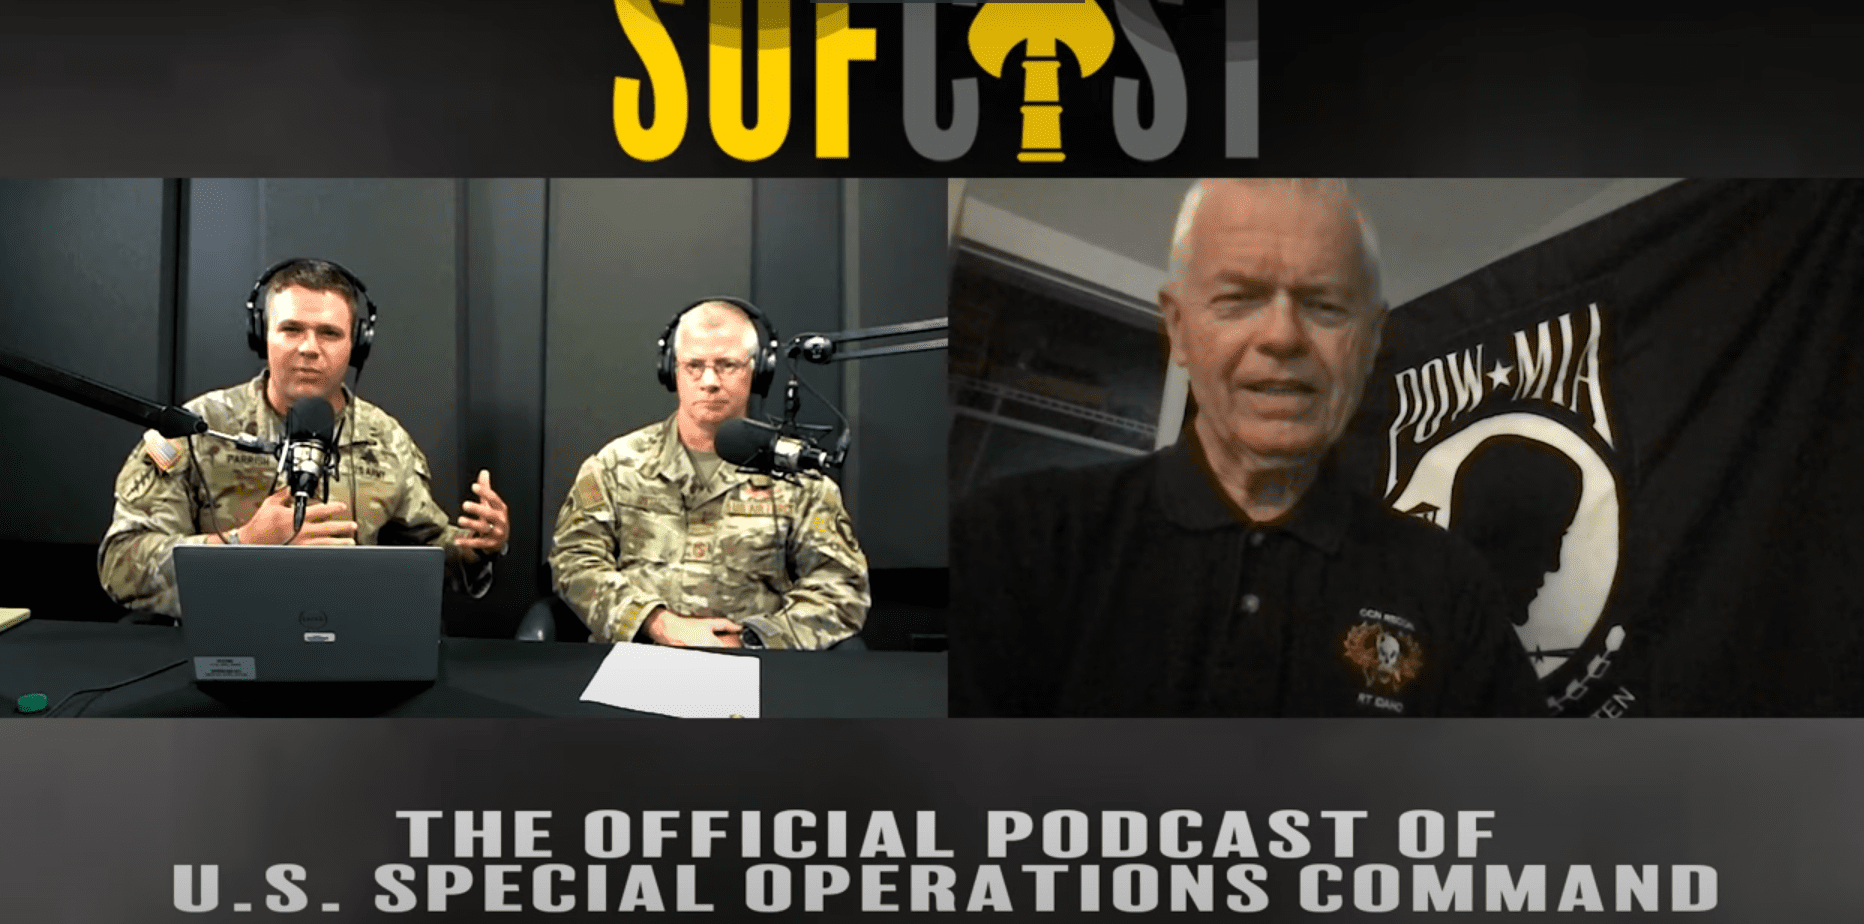 My interview with the US SOCOM – the Special Operations Command based in Florida